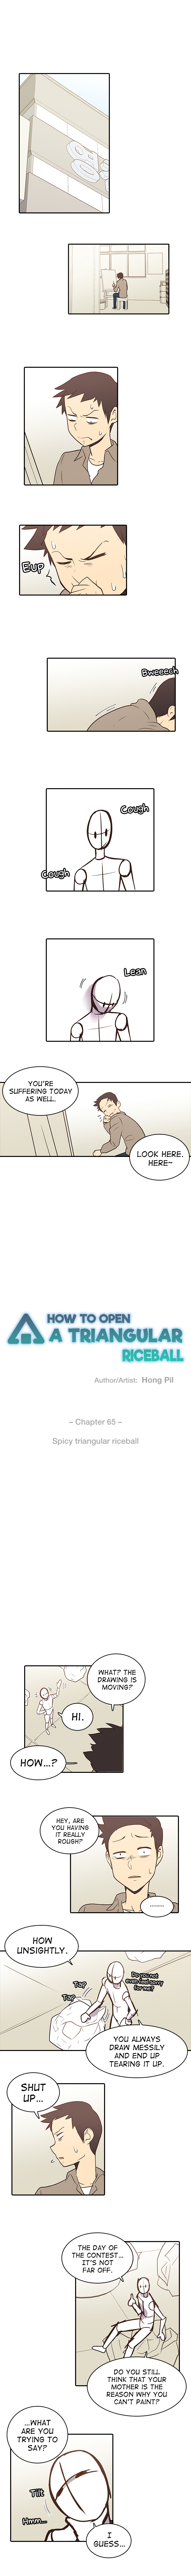 How to Open a Triangular Riceball - Chapter 65 Page 2